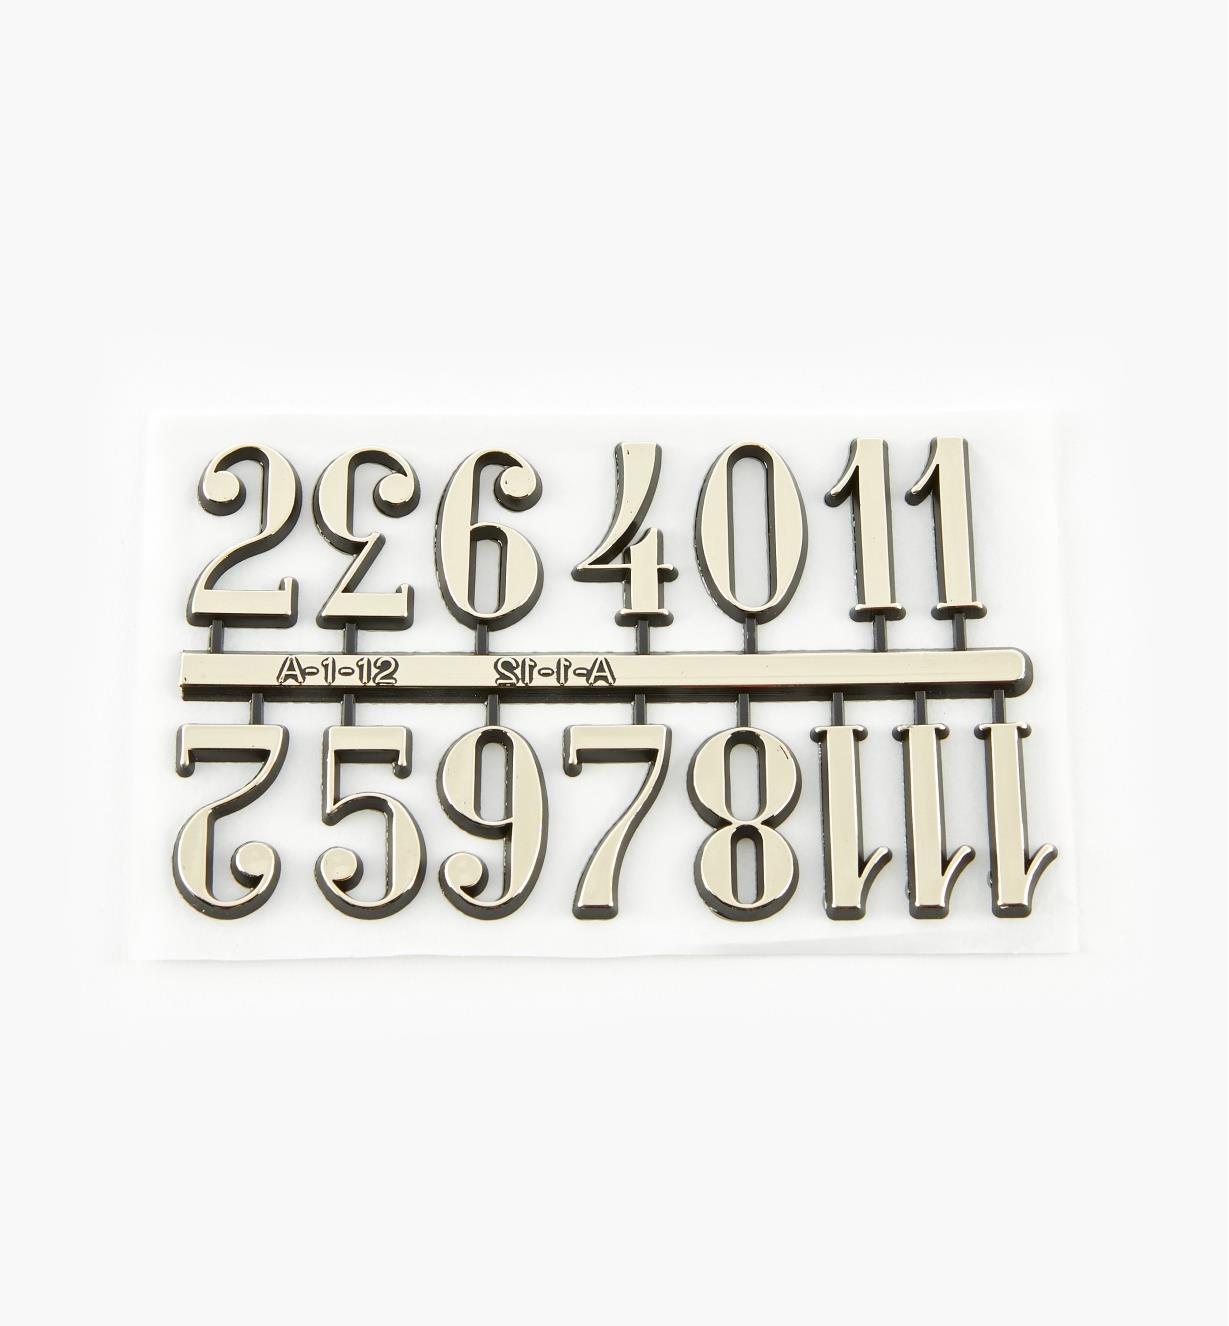 46K5601 - 1" Arabic Adhesive-Backed Numerals, set of 12